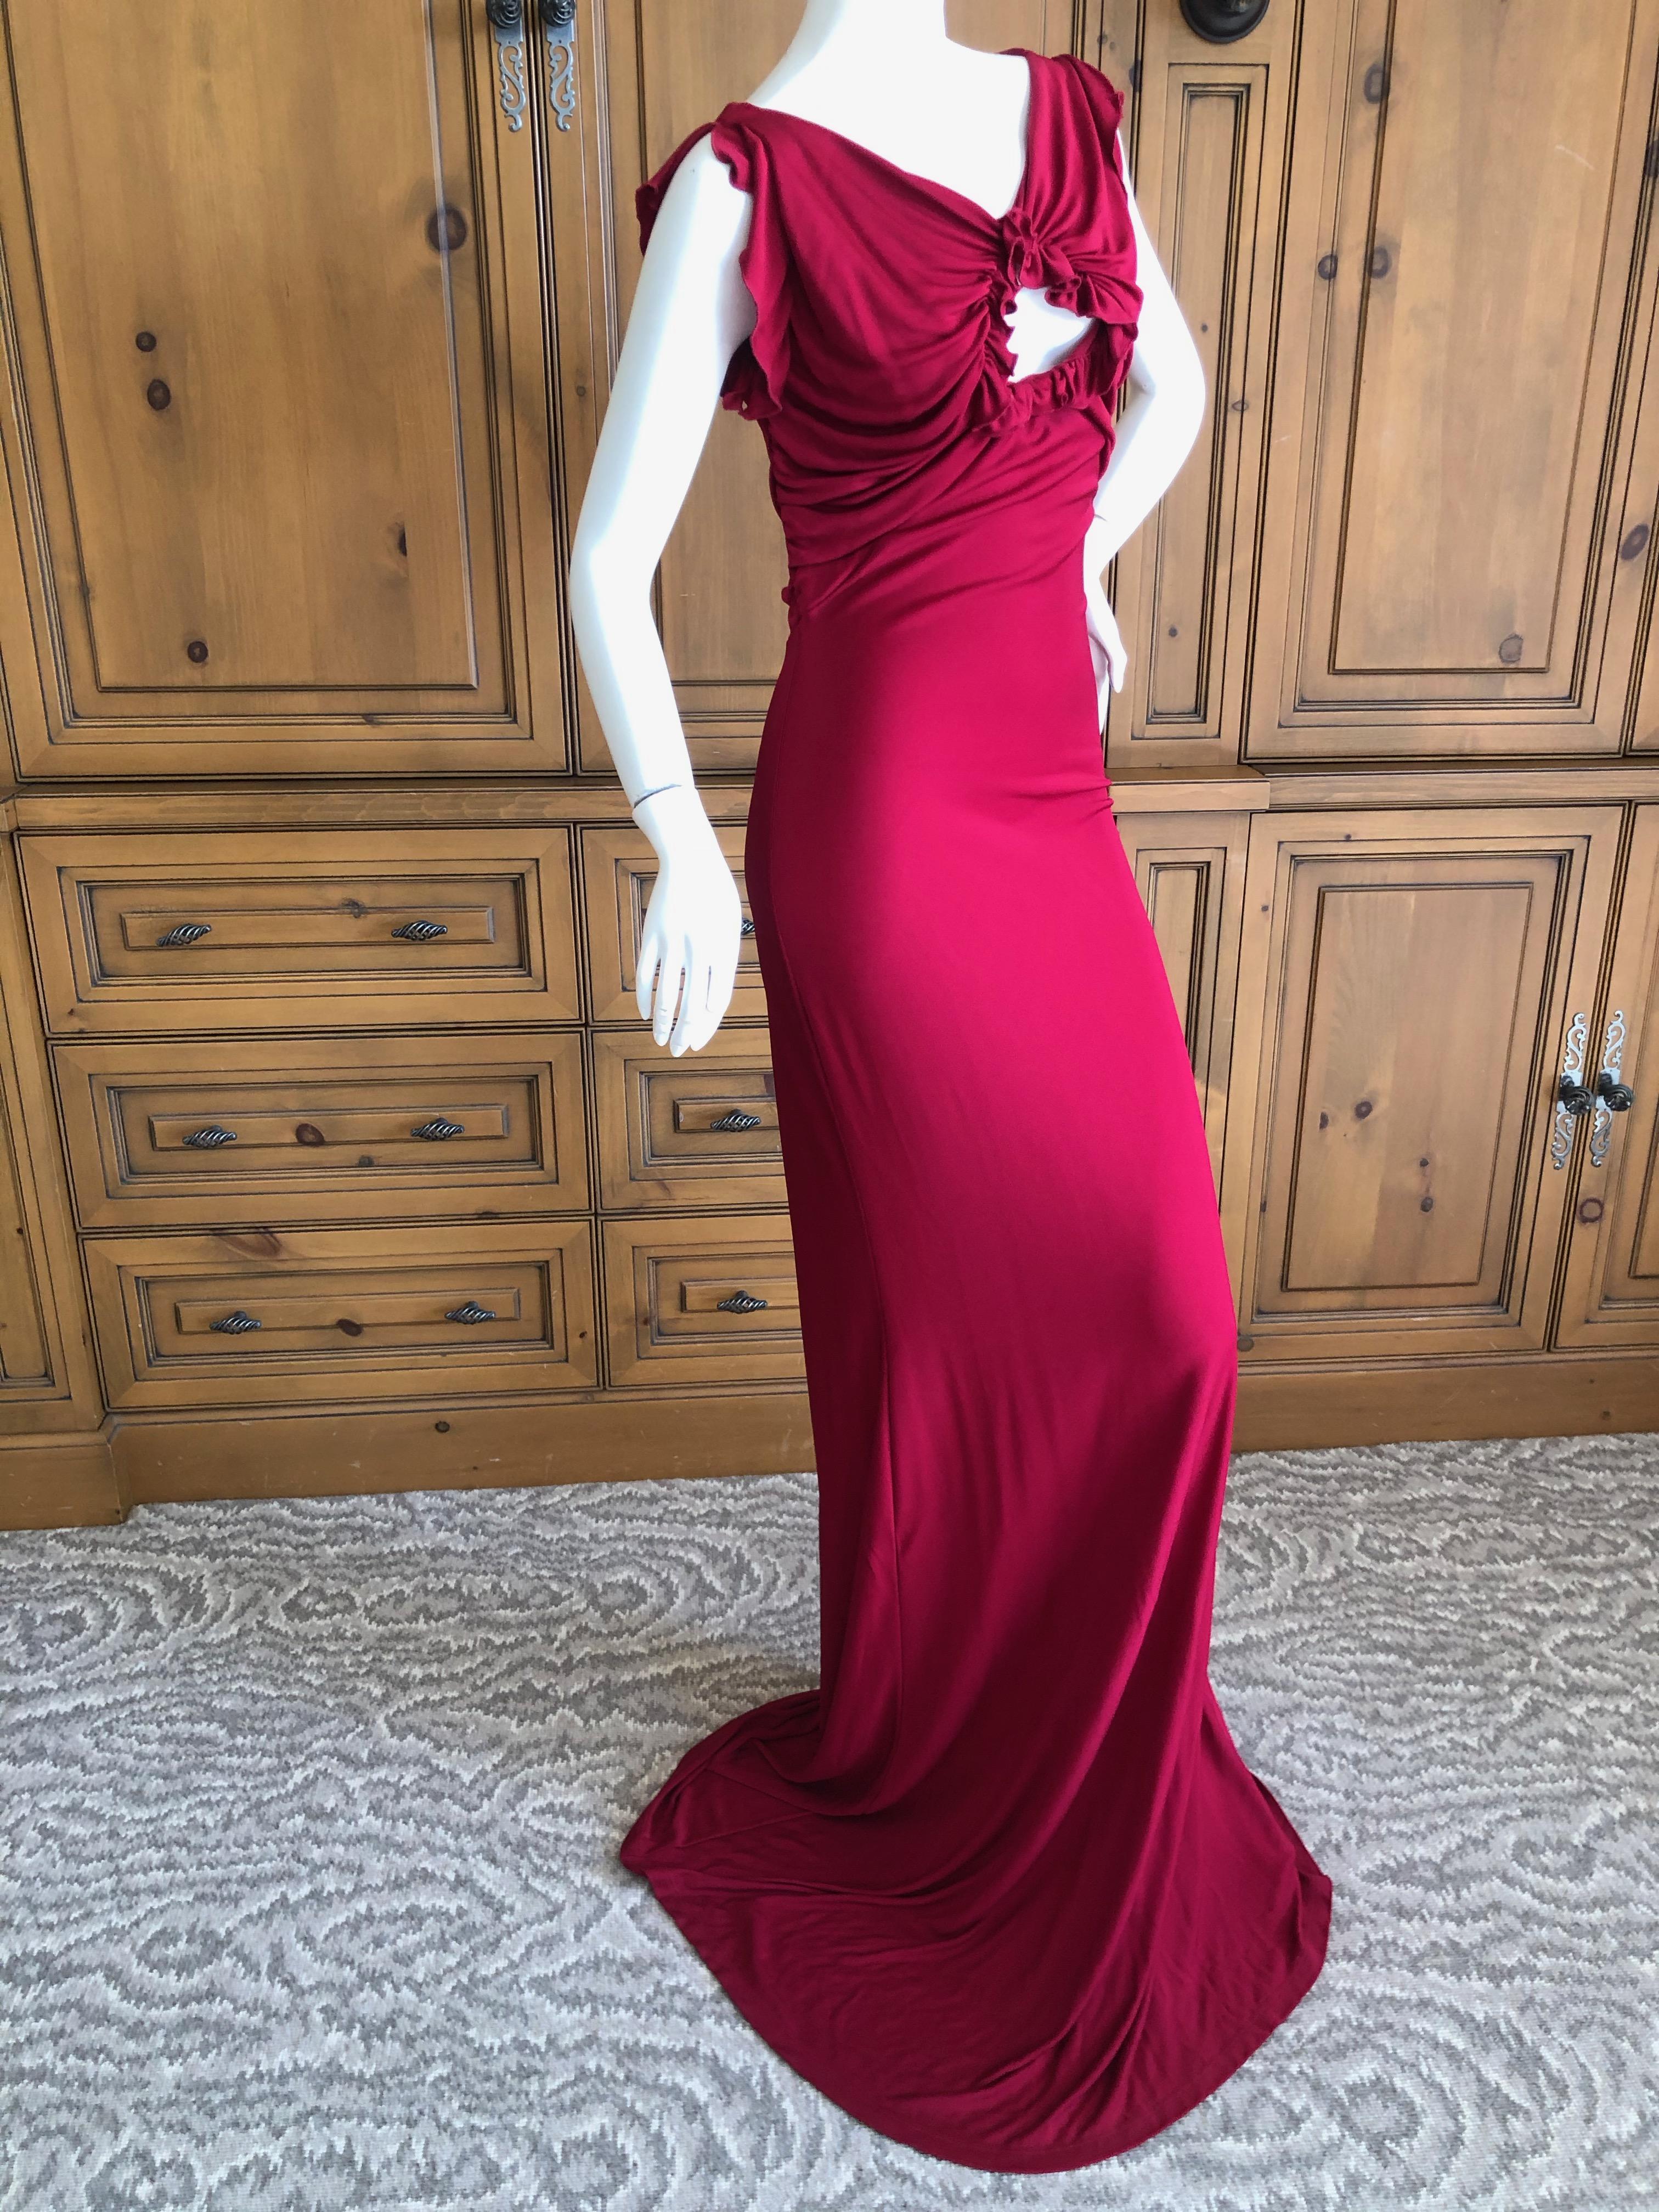   John Galliano Vintage Bias Cut Red Evening Dress with Keyhole Details For Sale 1